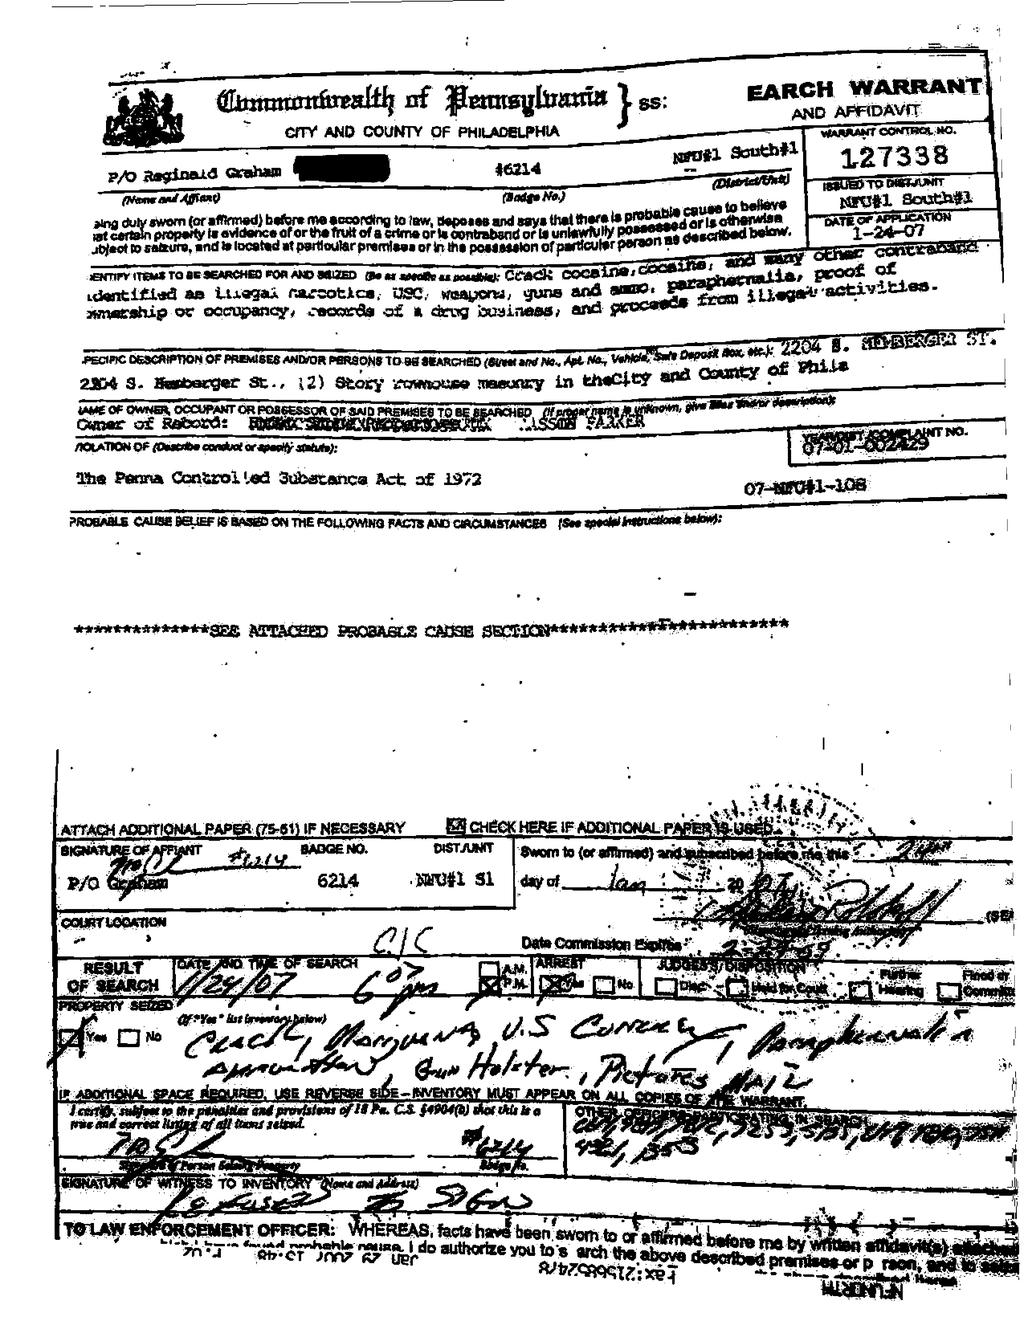 Graham s Probable Cause Affidavit and Search Warrant.